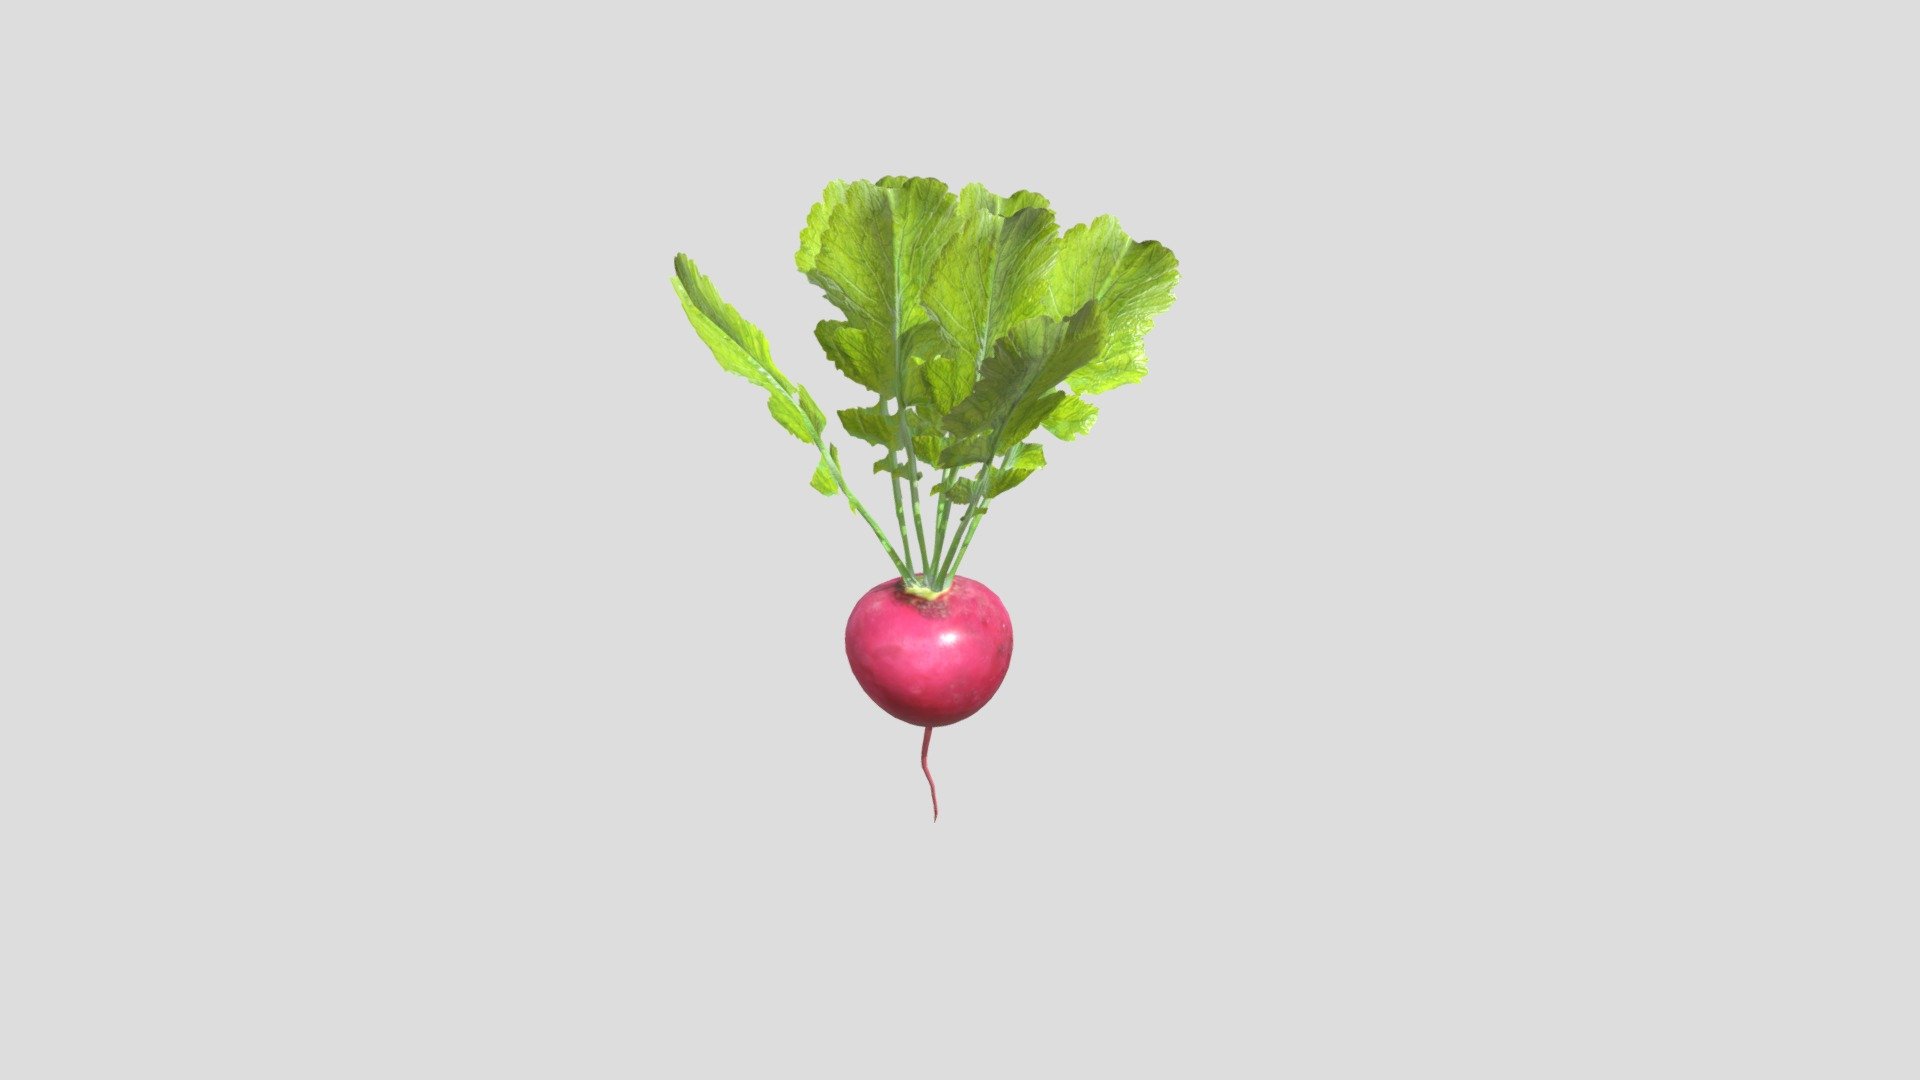 3d model of a Radish. Perfect for games, scenes or renders.

Model is correctly divided into main parts. All main parts are presented as separate parts therefore materials of objects are easy to be modified or removed and standard parts are easy to be replaced.

TEXTURES: Models includes high textures with maps: Base Color (.png) Height (.png) Metallic (.png) Normal (.png) Roughness (.png)

FORMATS: .obj .dae .stl .blend .fbx .3ds

GENERAL: Easy editable. Model is fully textured.

Vertices:1.6k Polygons: 1.5k

All formats have been tested and work correctly.

Some files may need textures or materials adjusted or added depending on the program they are imported into 3d model